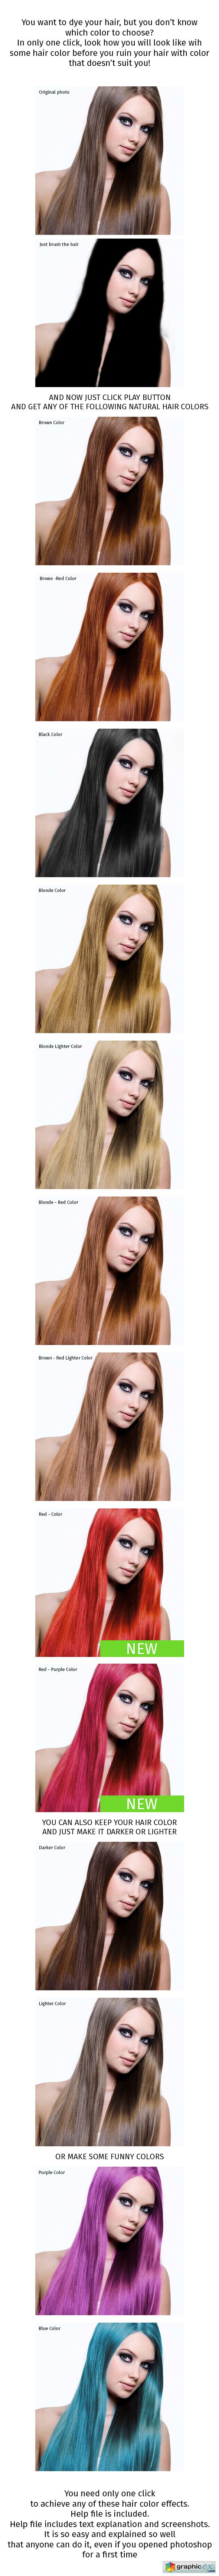 Hair Color Effect